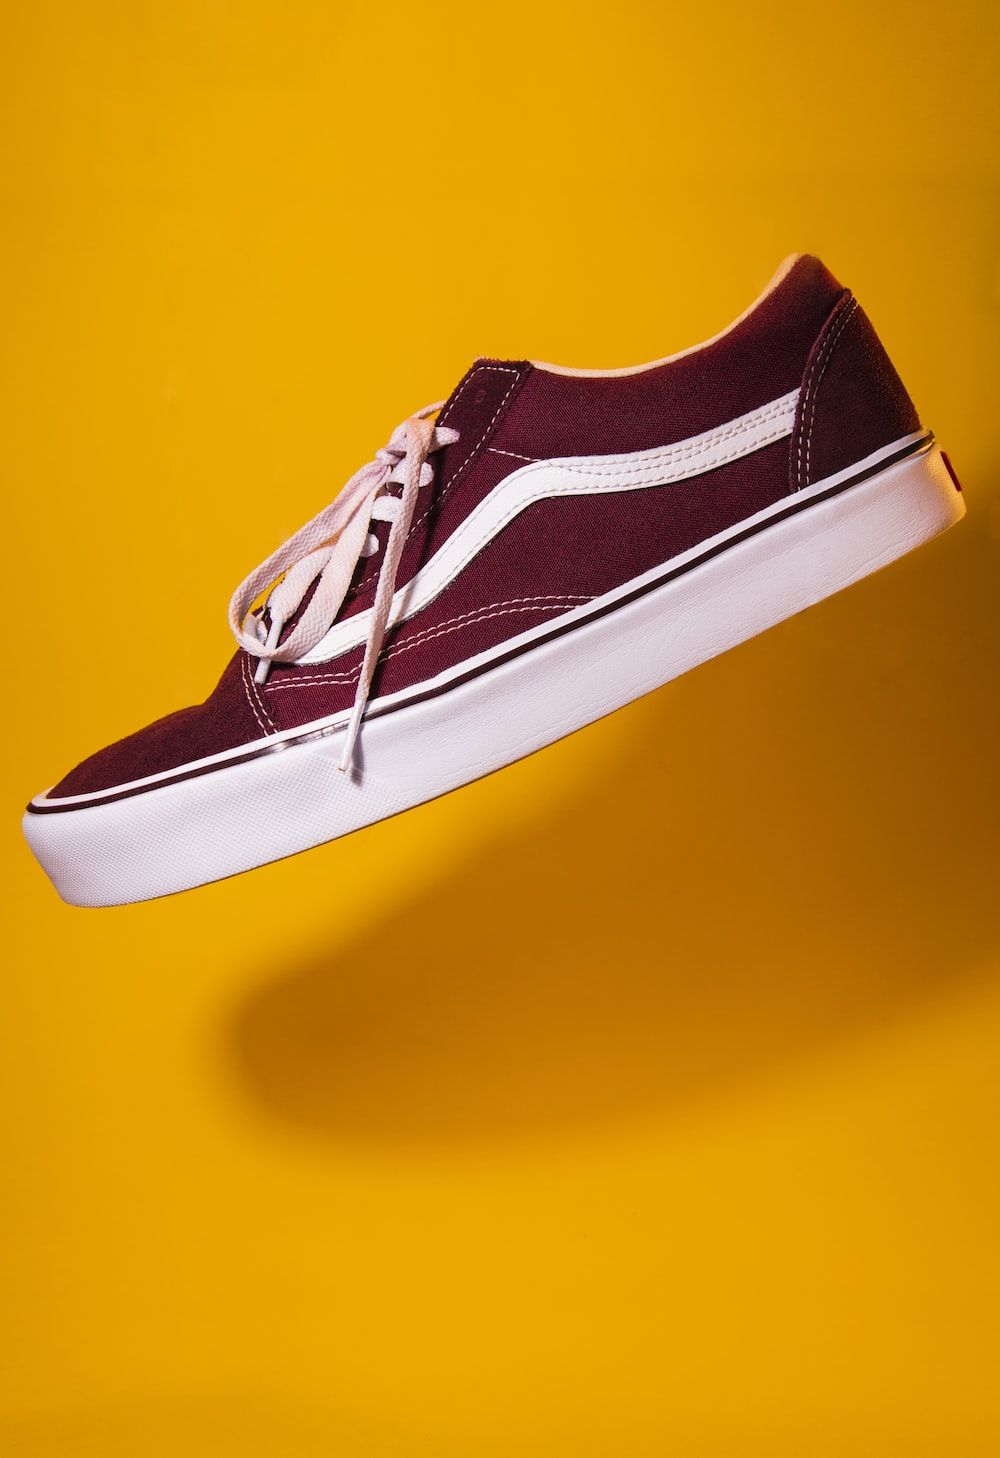 Vans Shoes Picture. Download Free Image